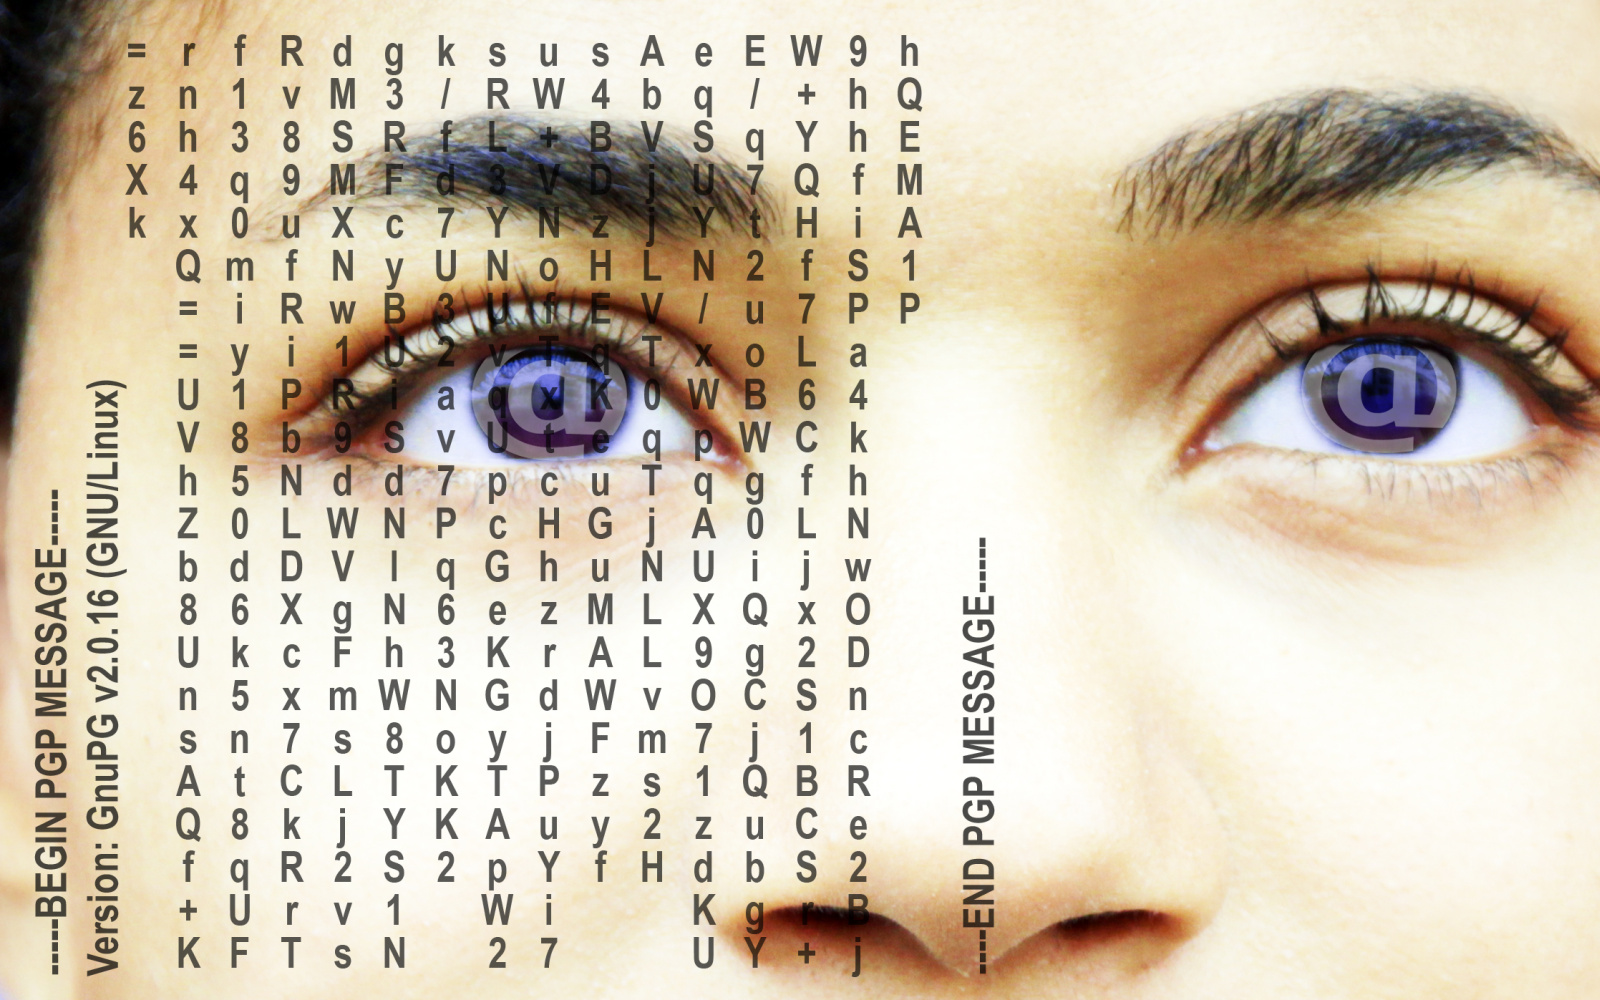 You can see the section of a human face, the focus is on the eyes and the nose, which are partly covered with letters.